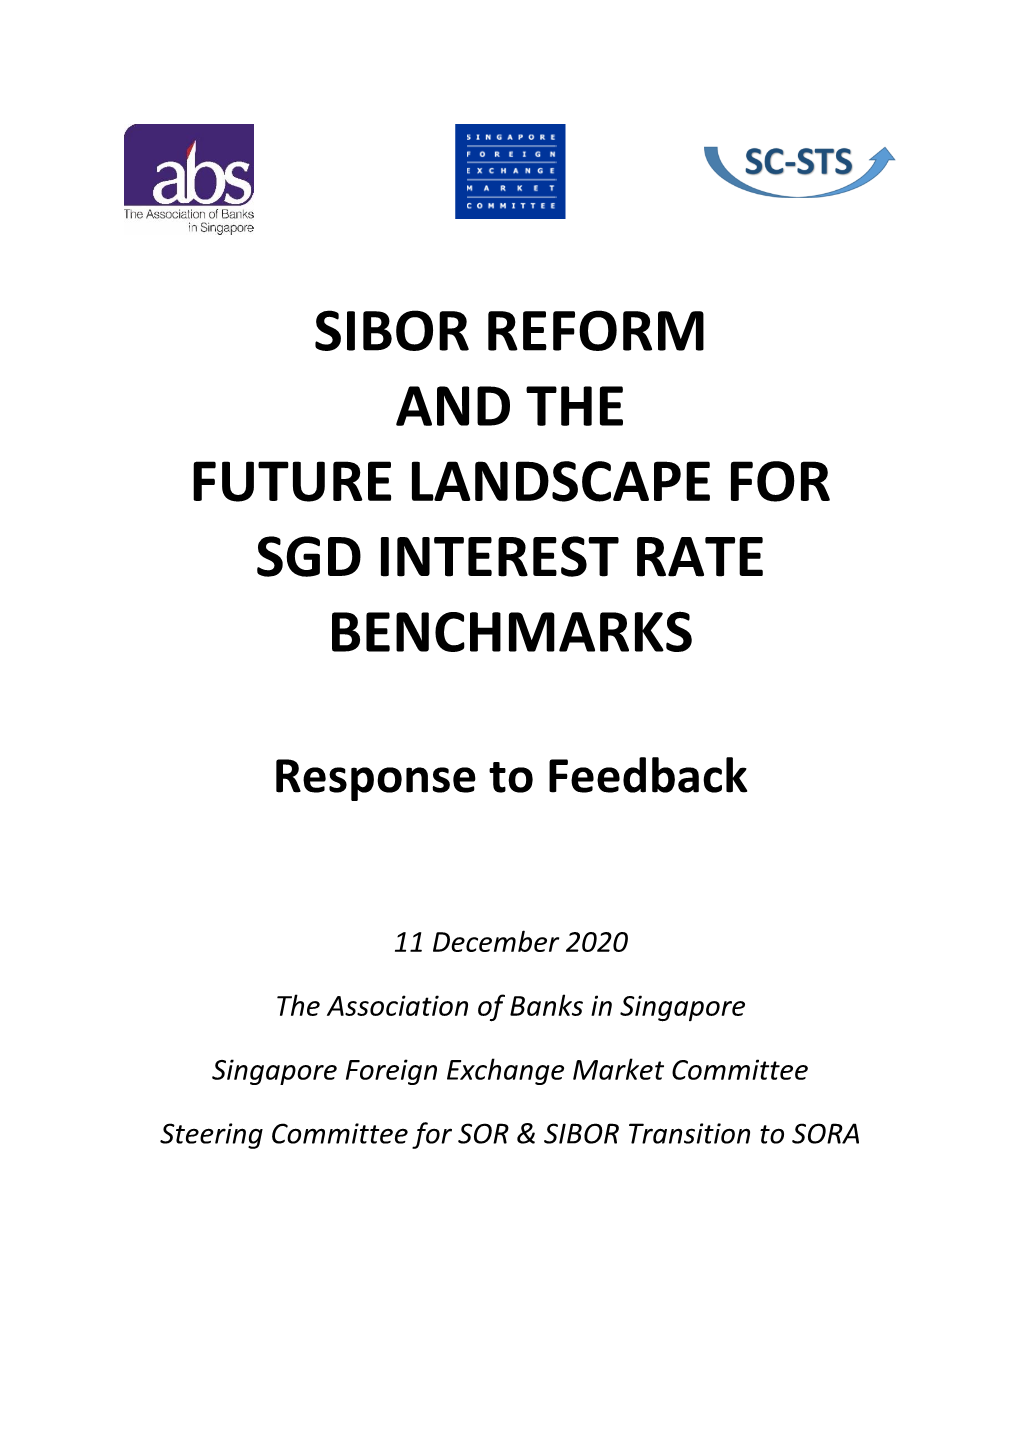 Response to Feedback on SIBOR Reform and the Future Landscape